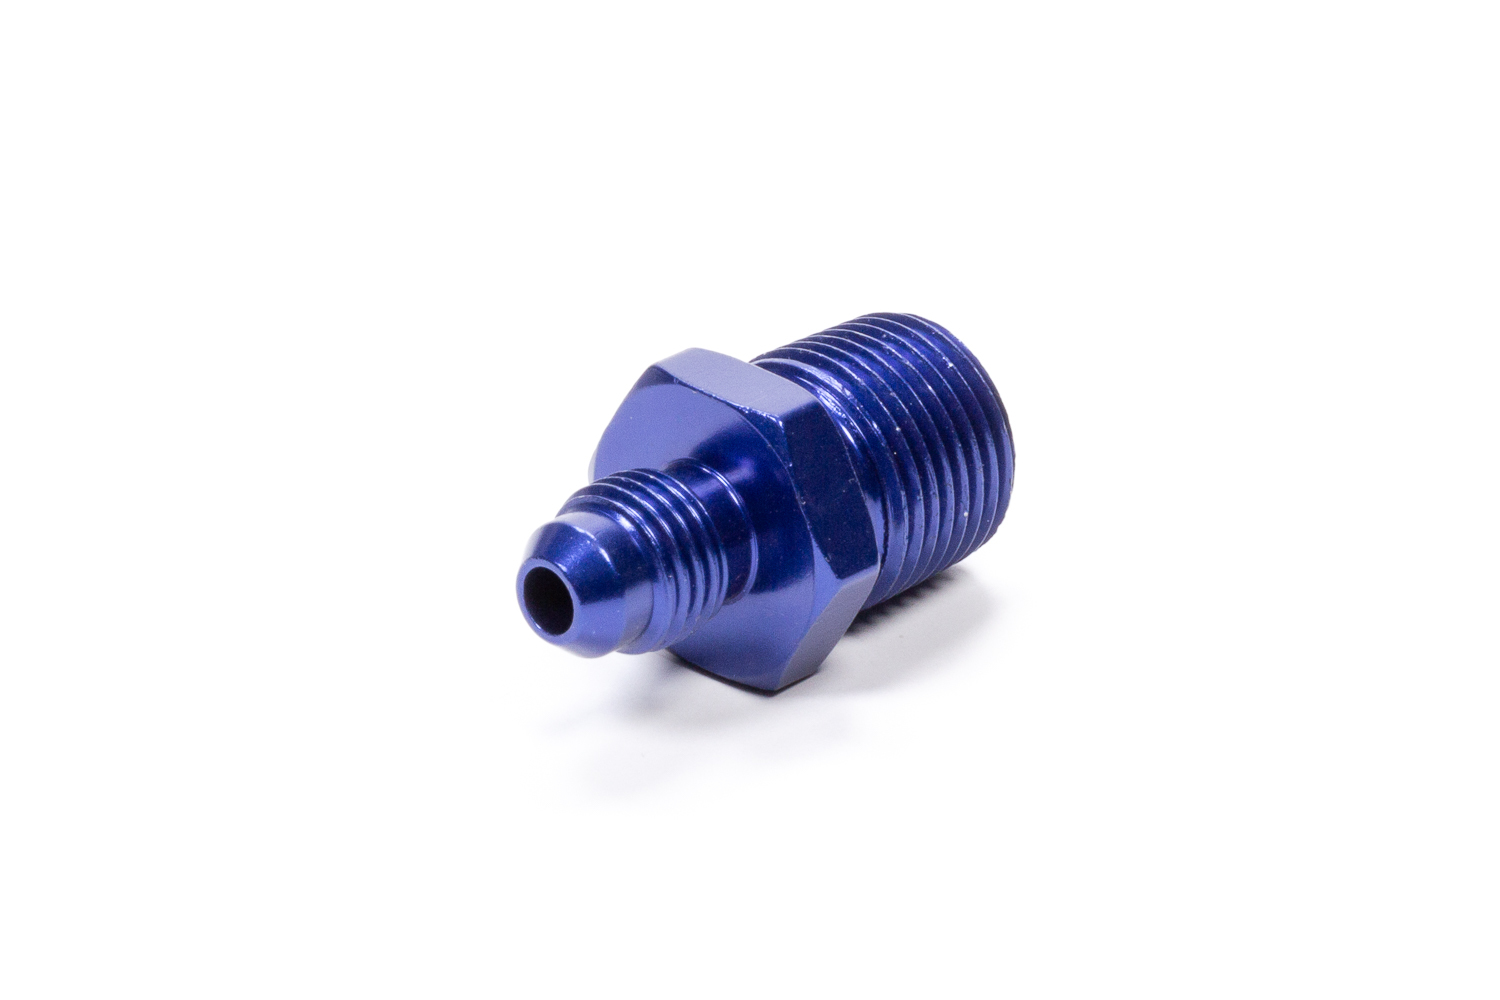 Fragola 481644 Fitting, Adapter, Straight, 4 AN Male to 3/8 in NPT Male, Aluminum, Blue Anodized, Each